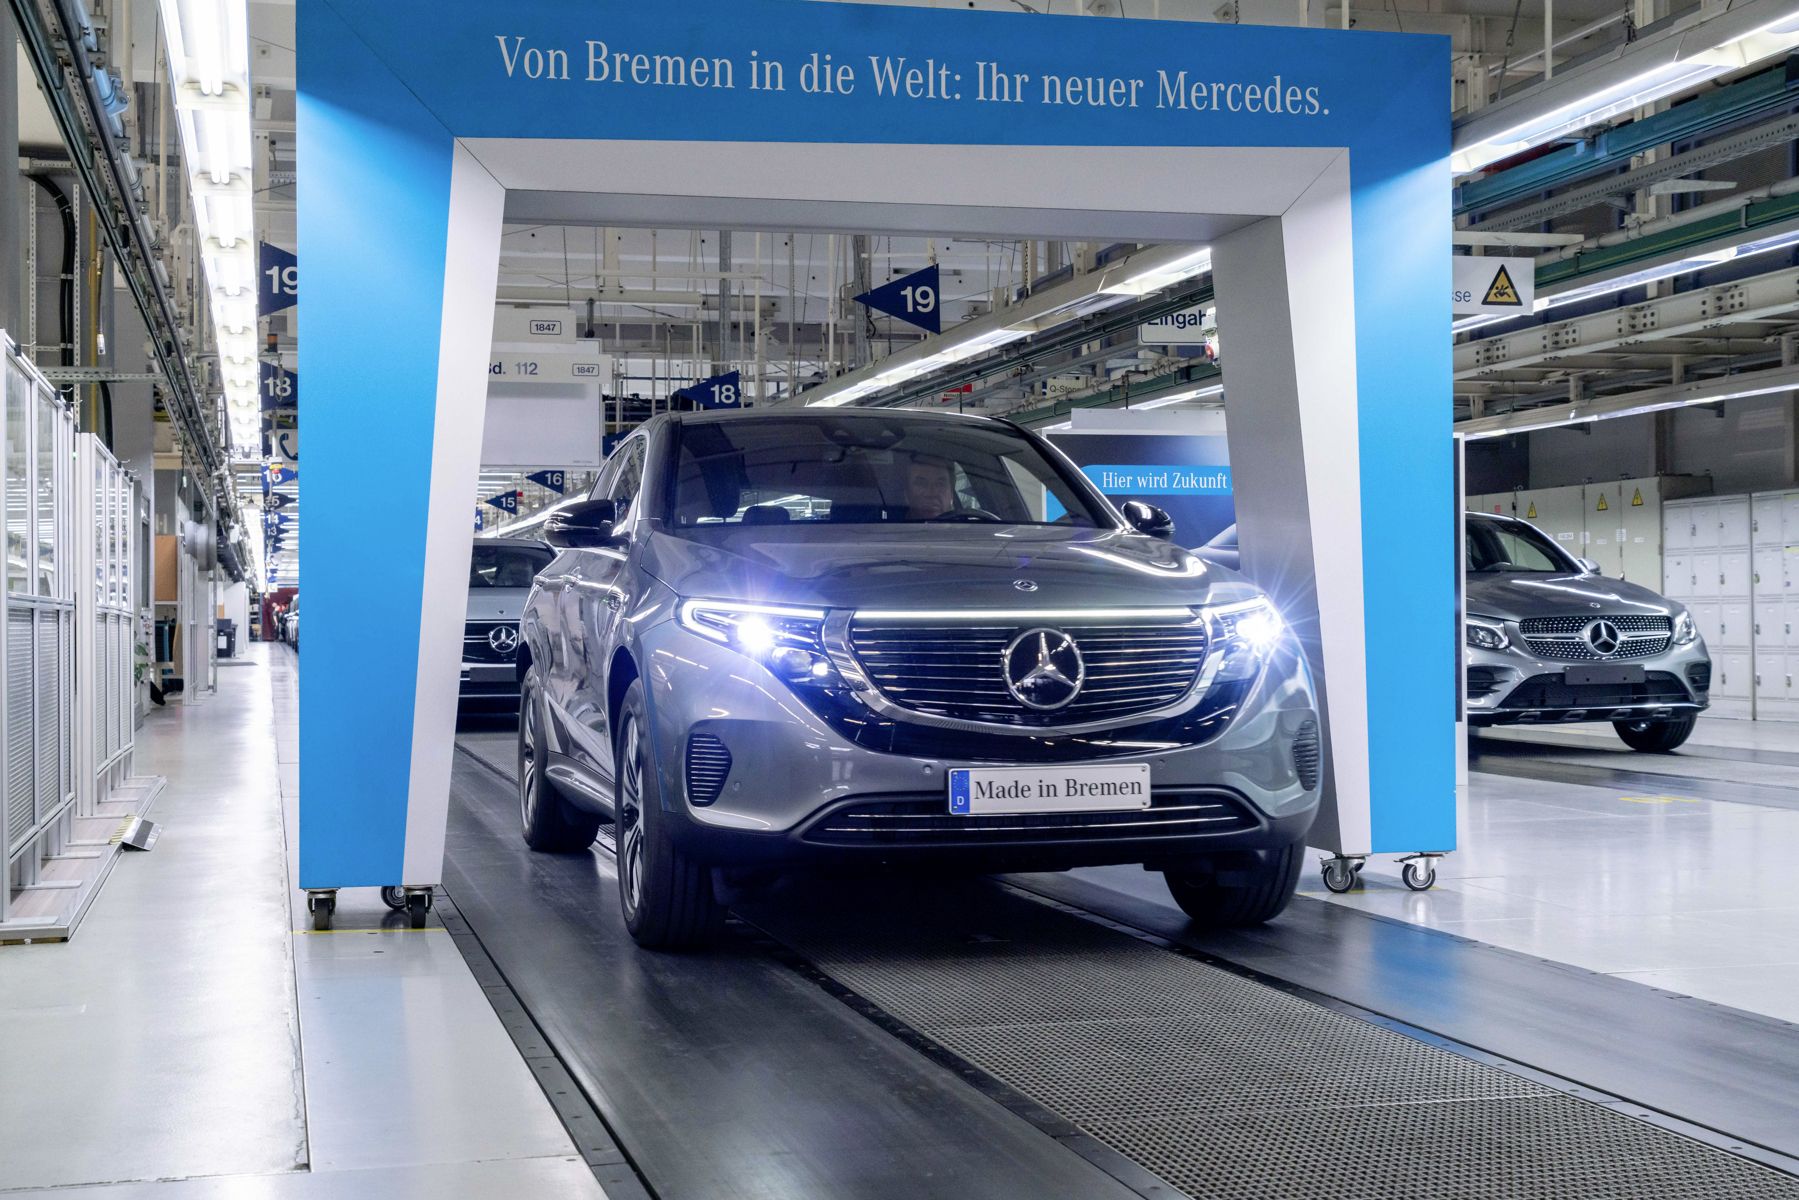 Brand new electric SUV for women: Mercedes-Benz EQC - Women's